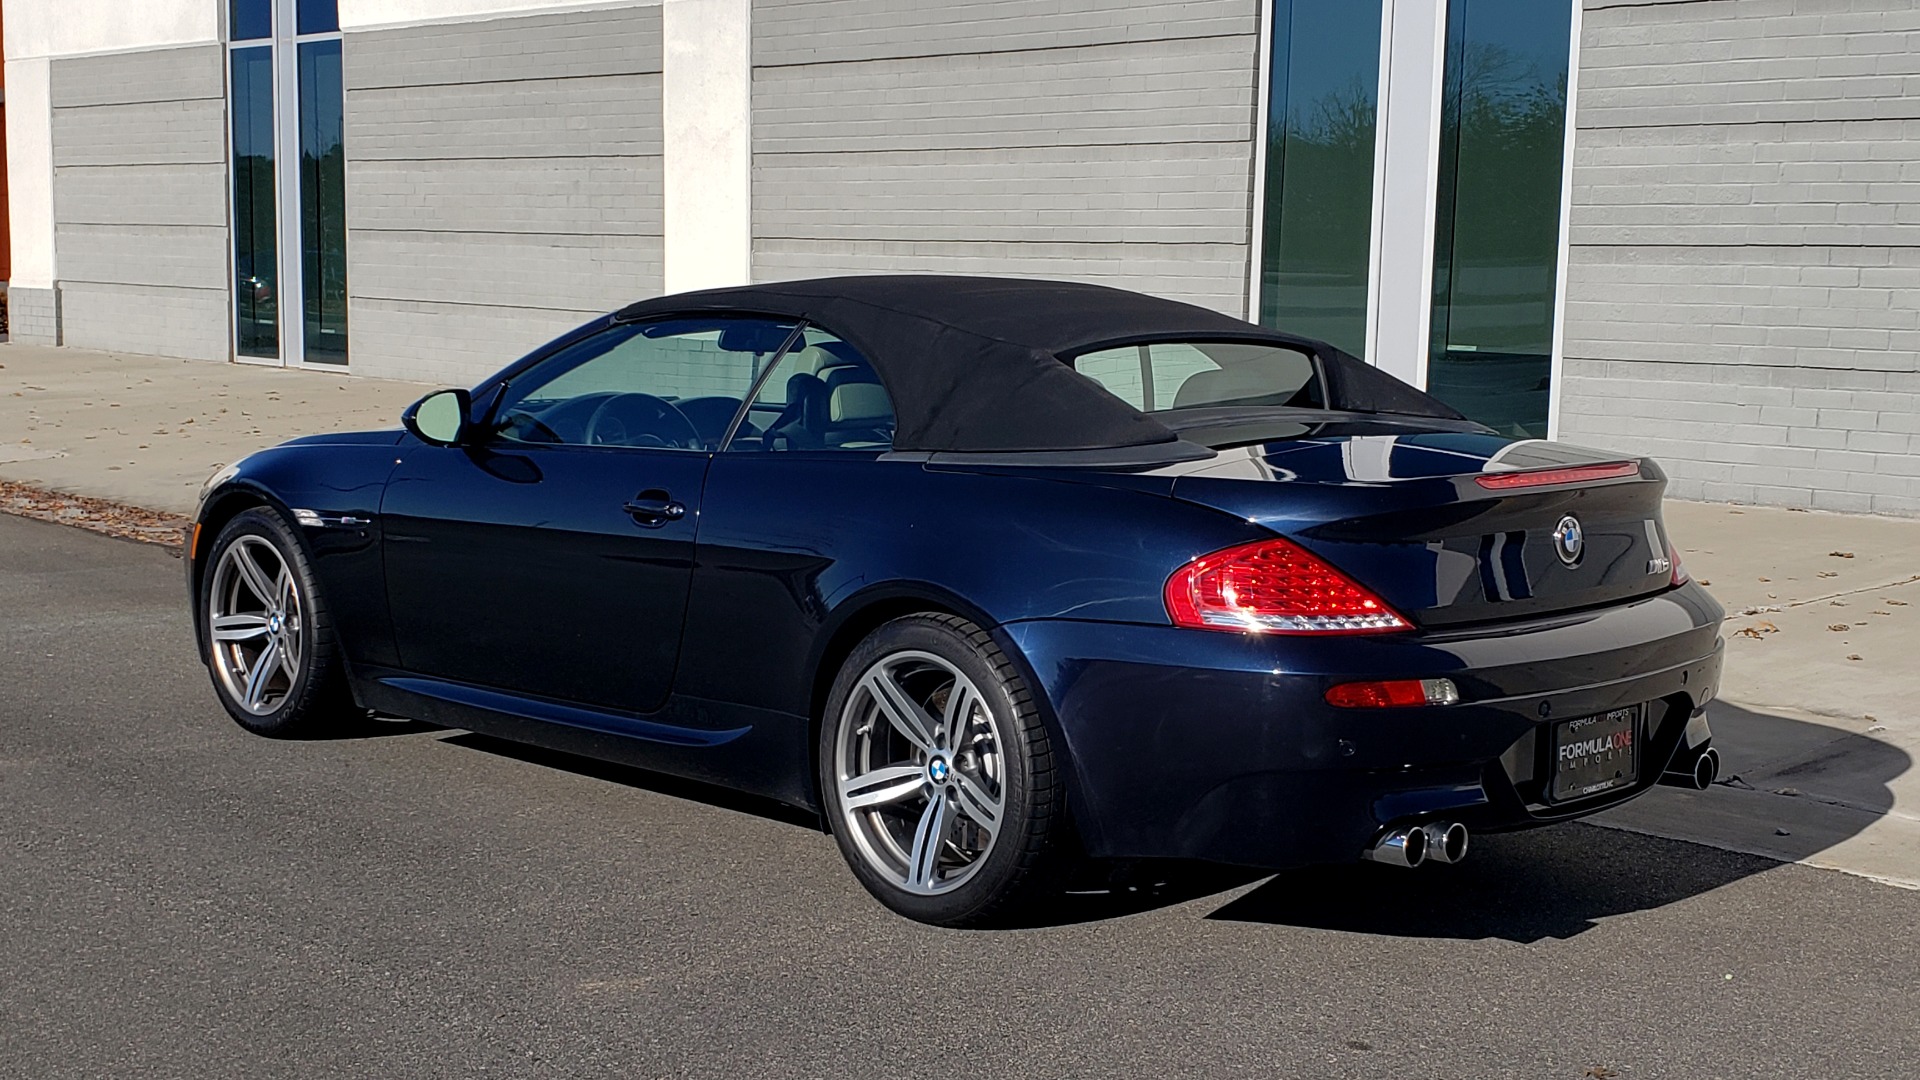 Used 2009 BMW M6 CONVERTIBLE / 5.0L V10 (500HP) / PREM SND / HUD / 19IN WHEELS for sale Sold at Formula Imports in Charlotte NC 28227 12